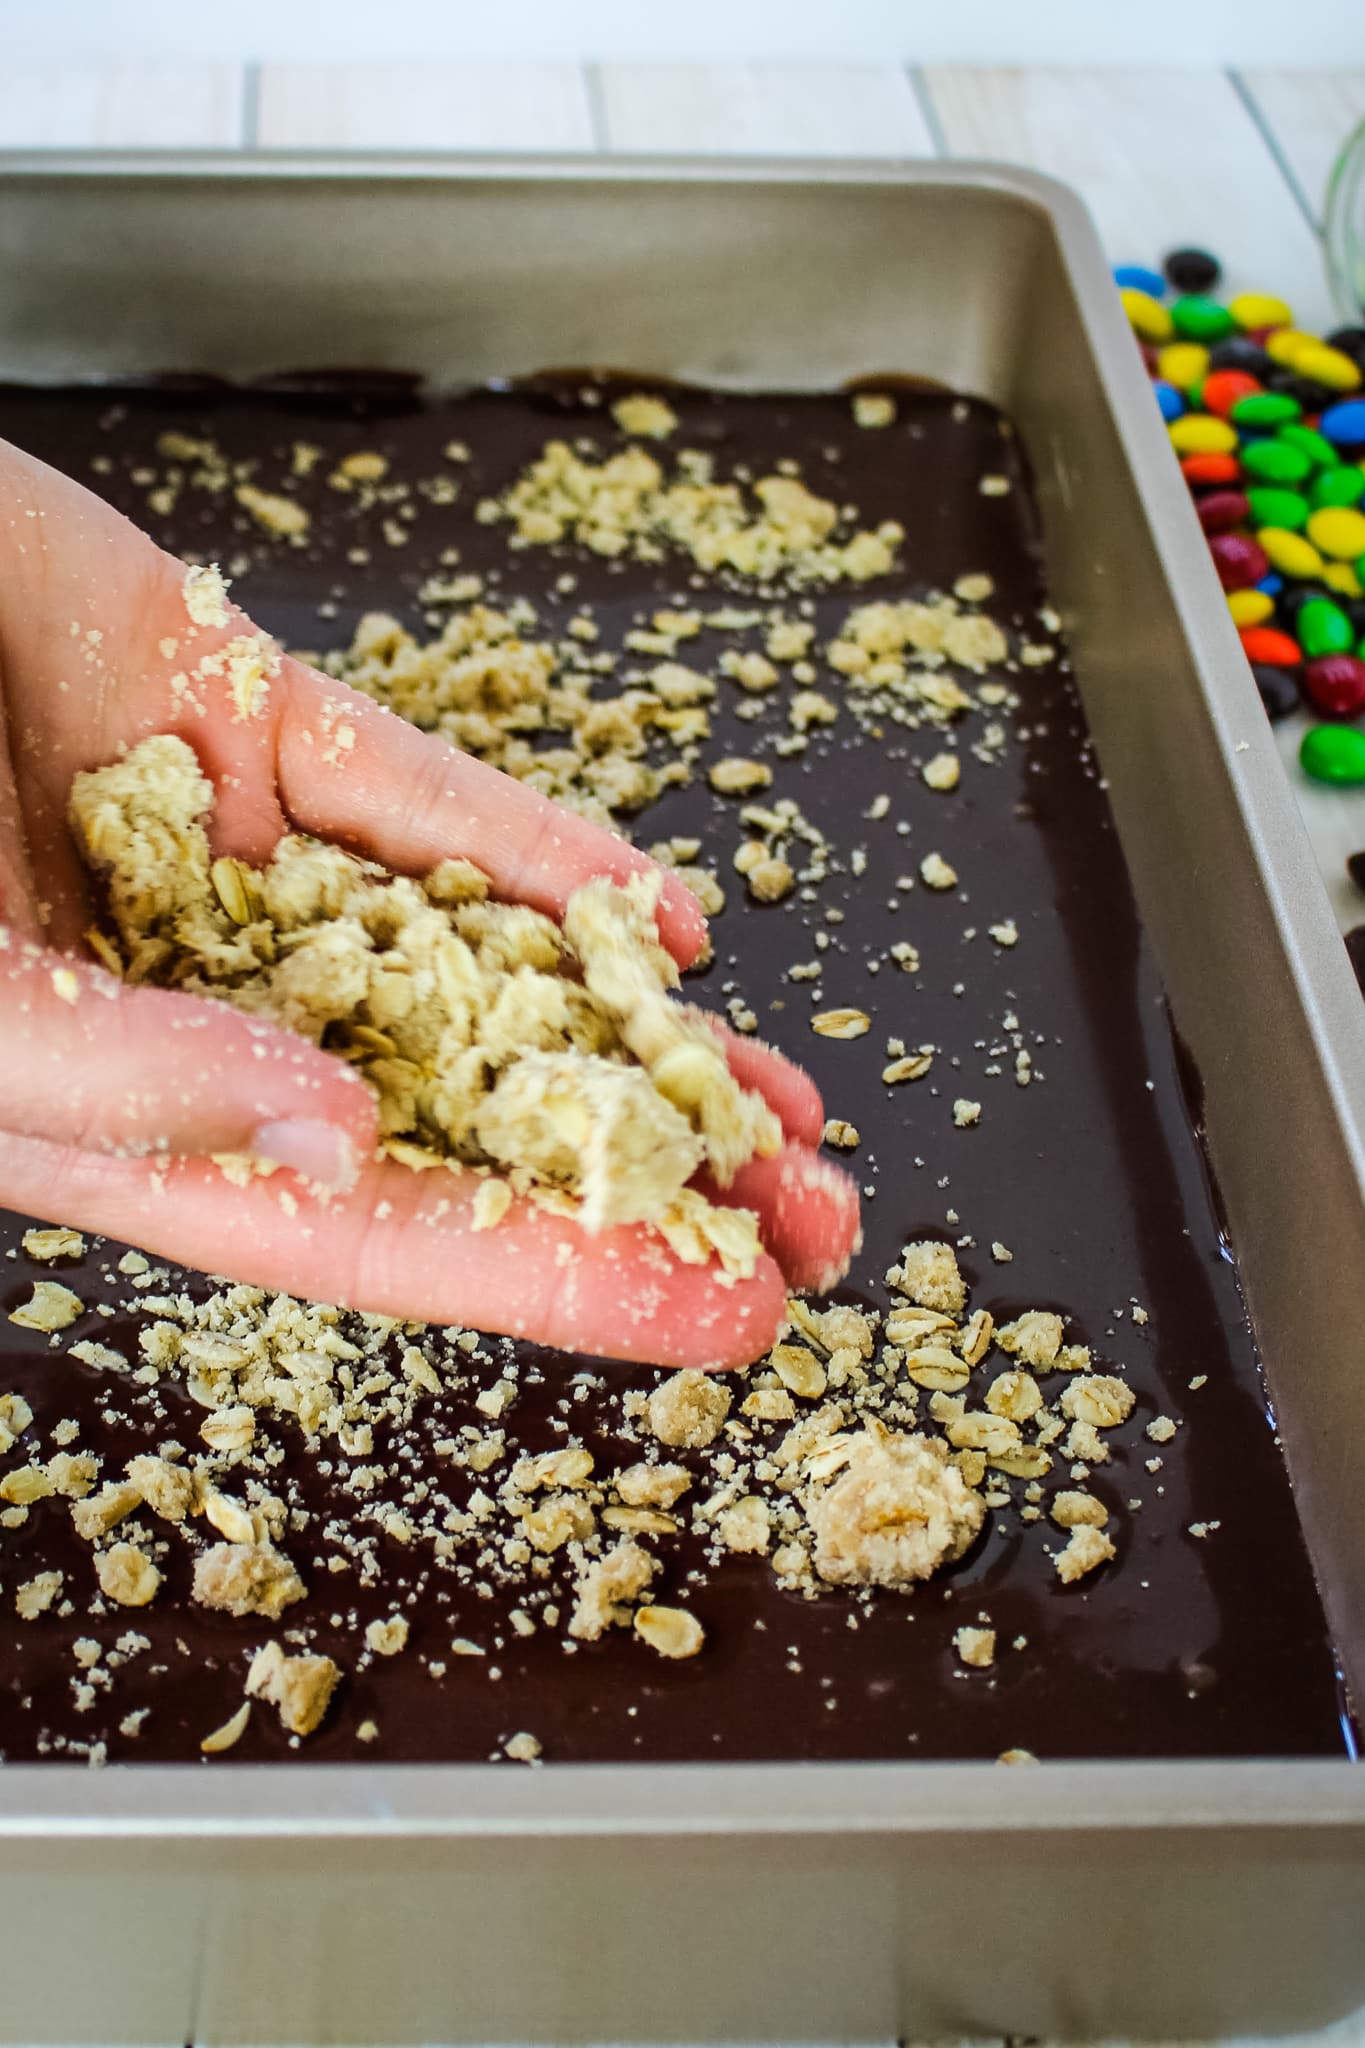 M&M oatmeal cookie bars, Oatmeal crumble being sprinkled on top of chocolate filling.